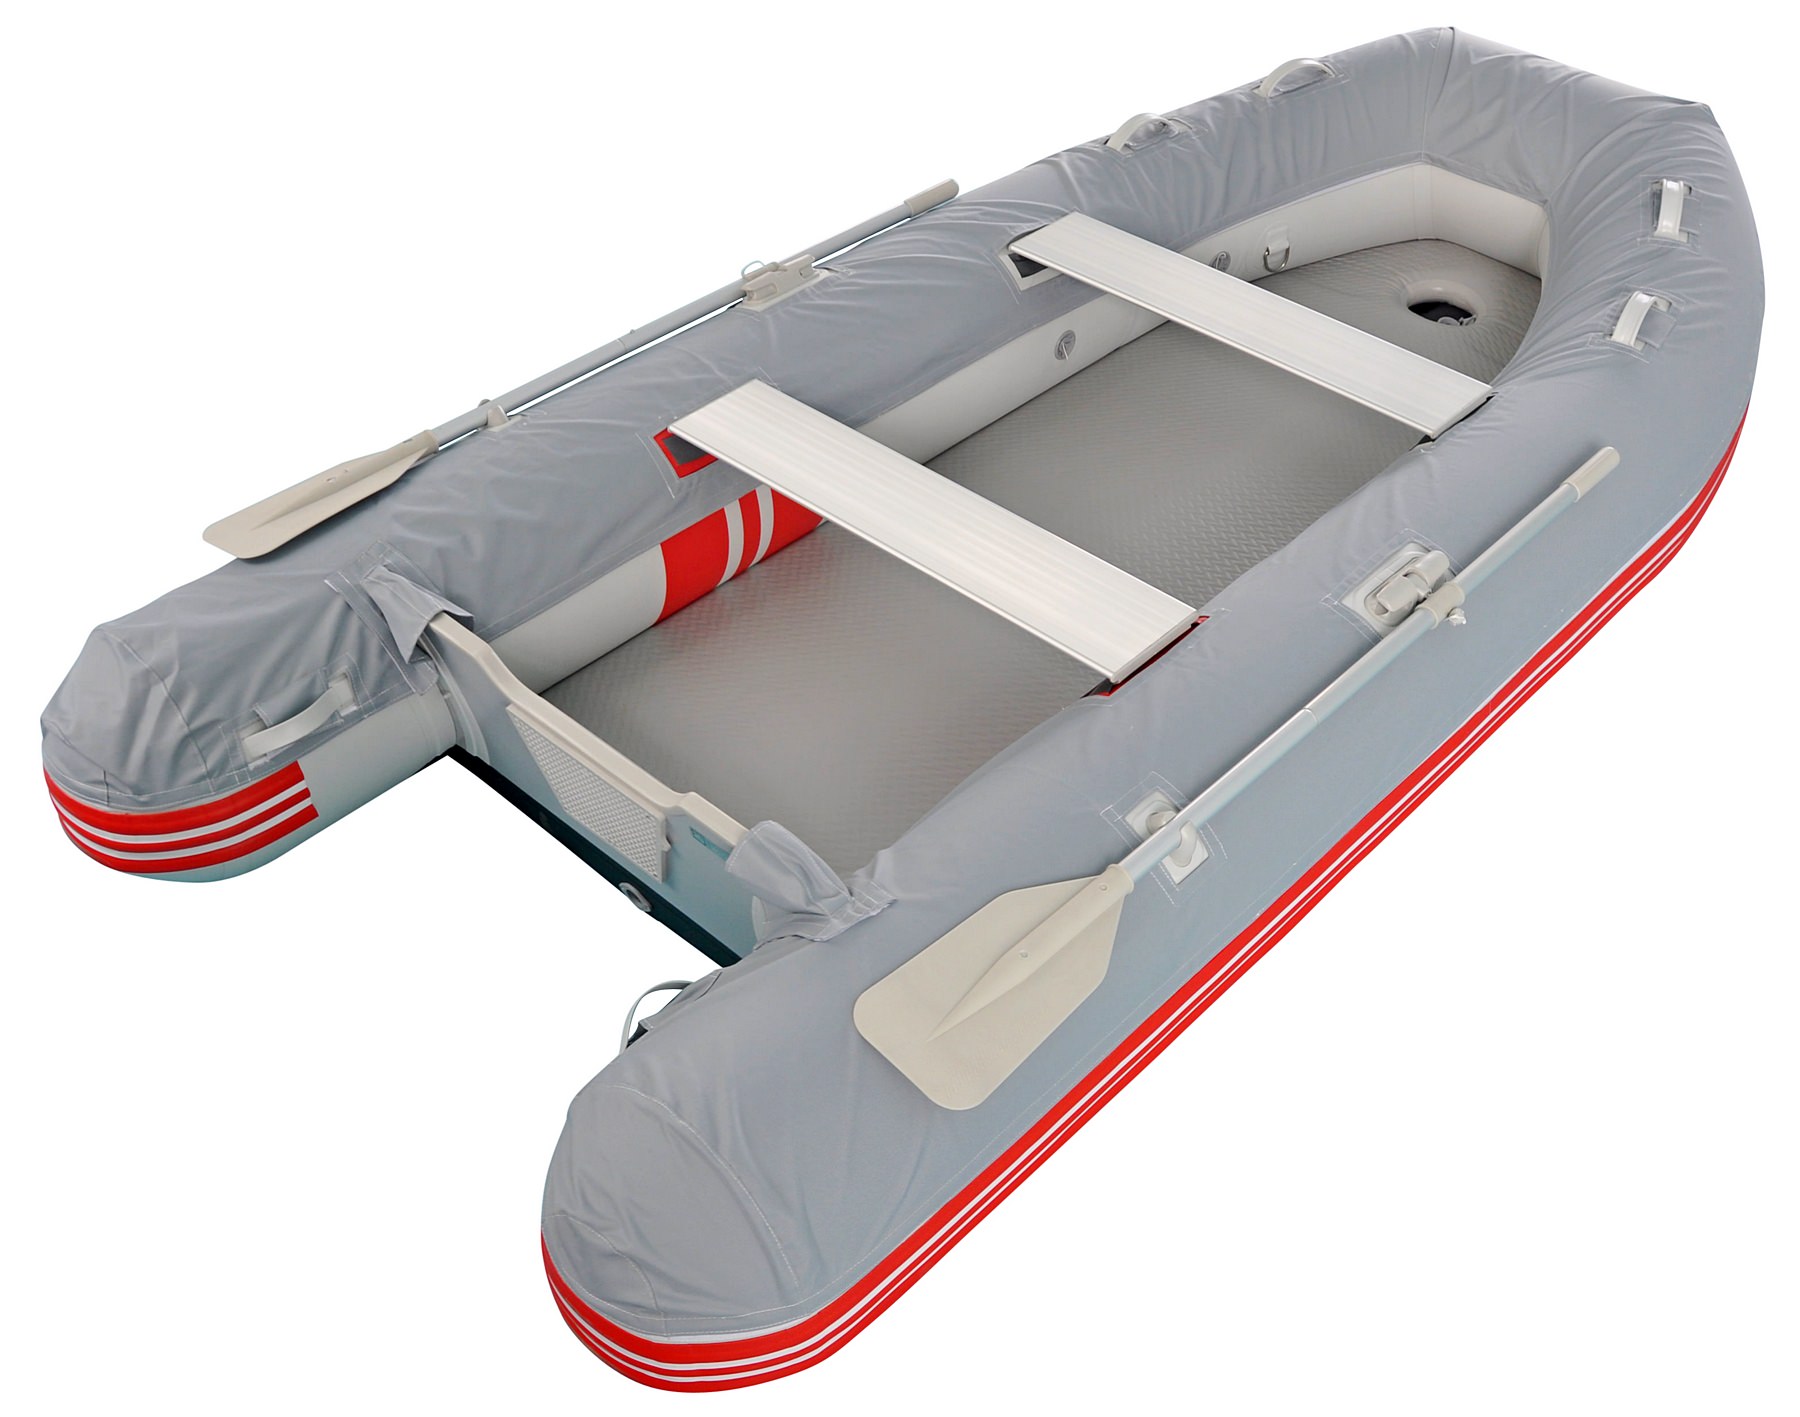 11' Premium Inflatable Dinghy Boats by Azzurro Mare